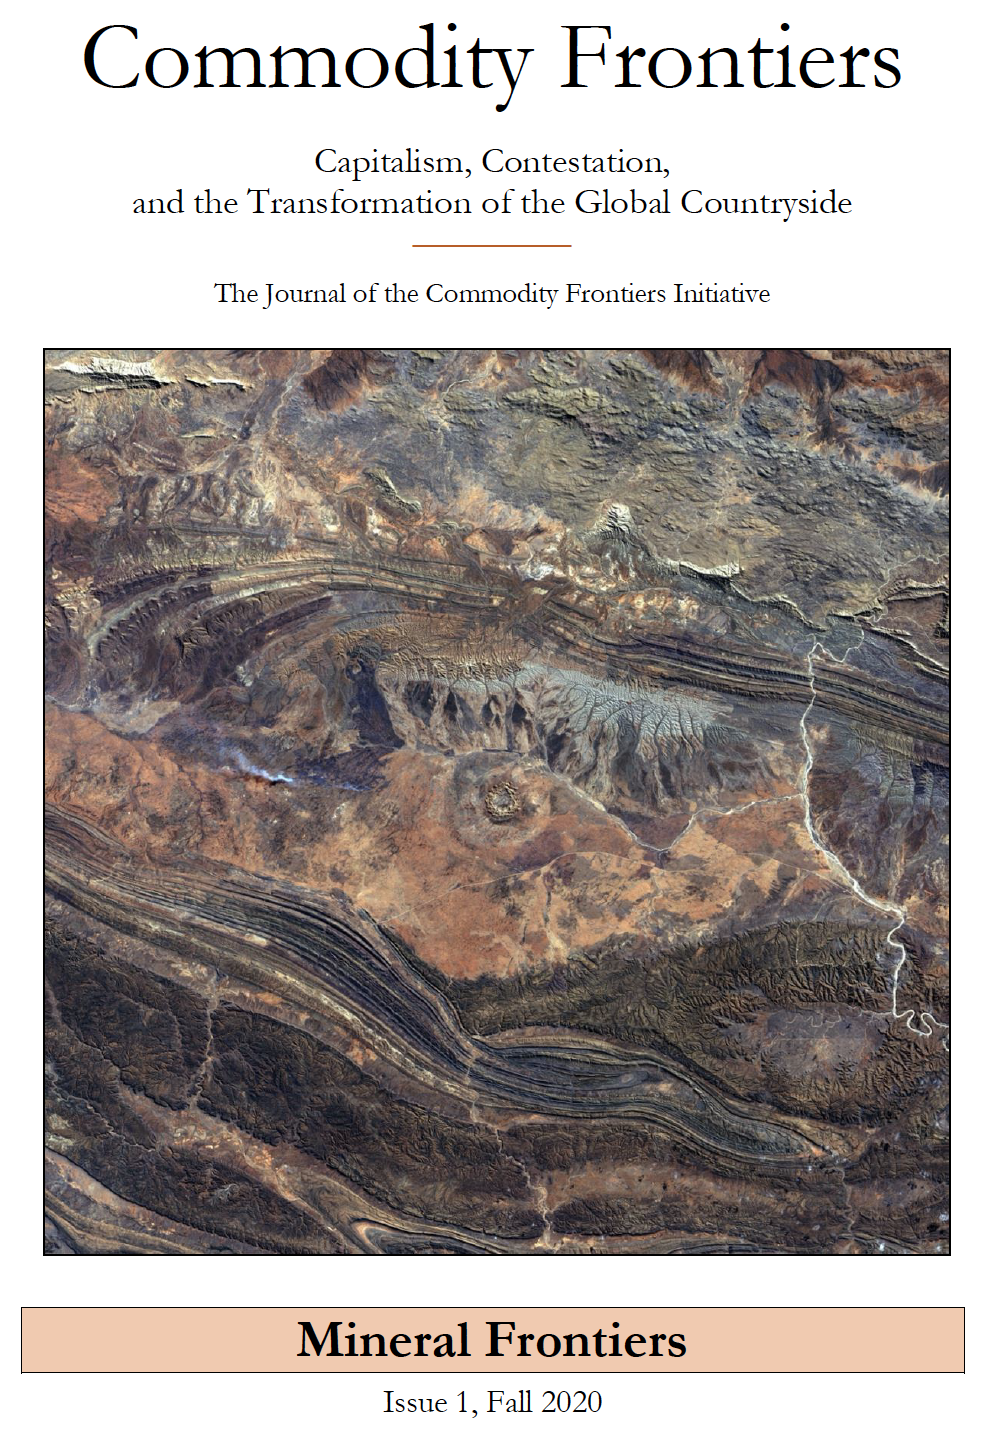 Commodity Frontiers title page